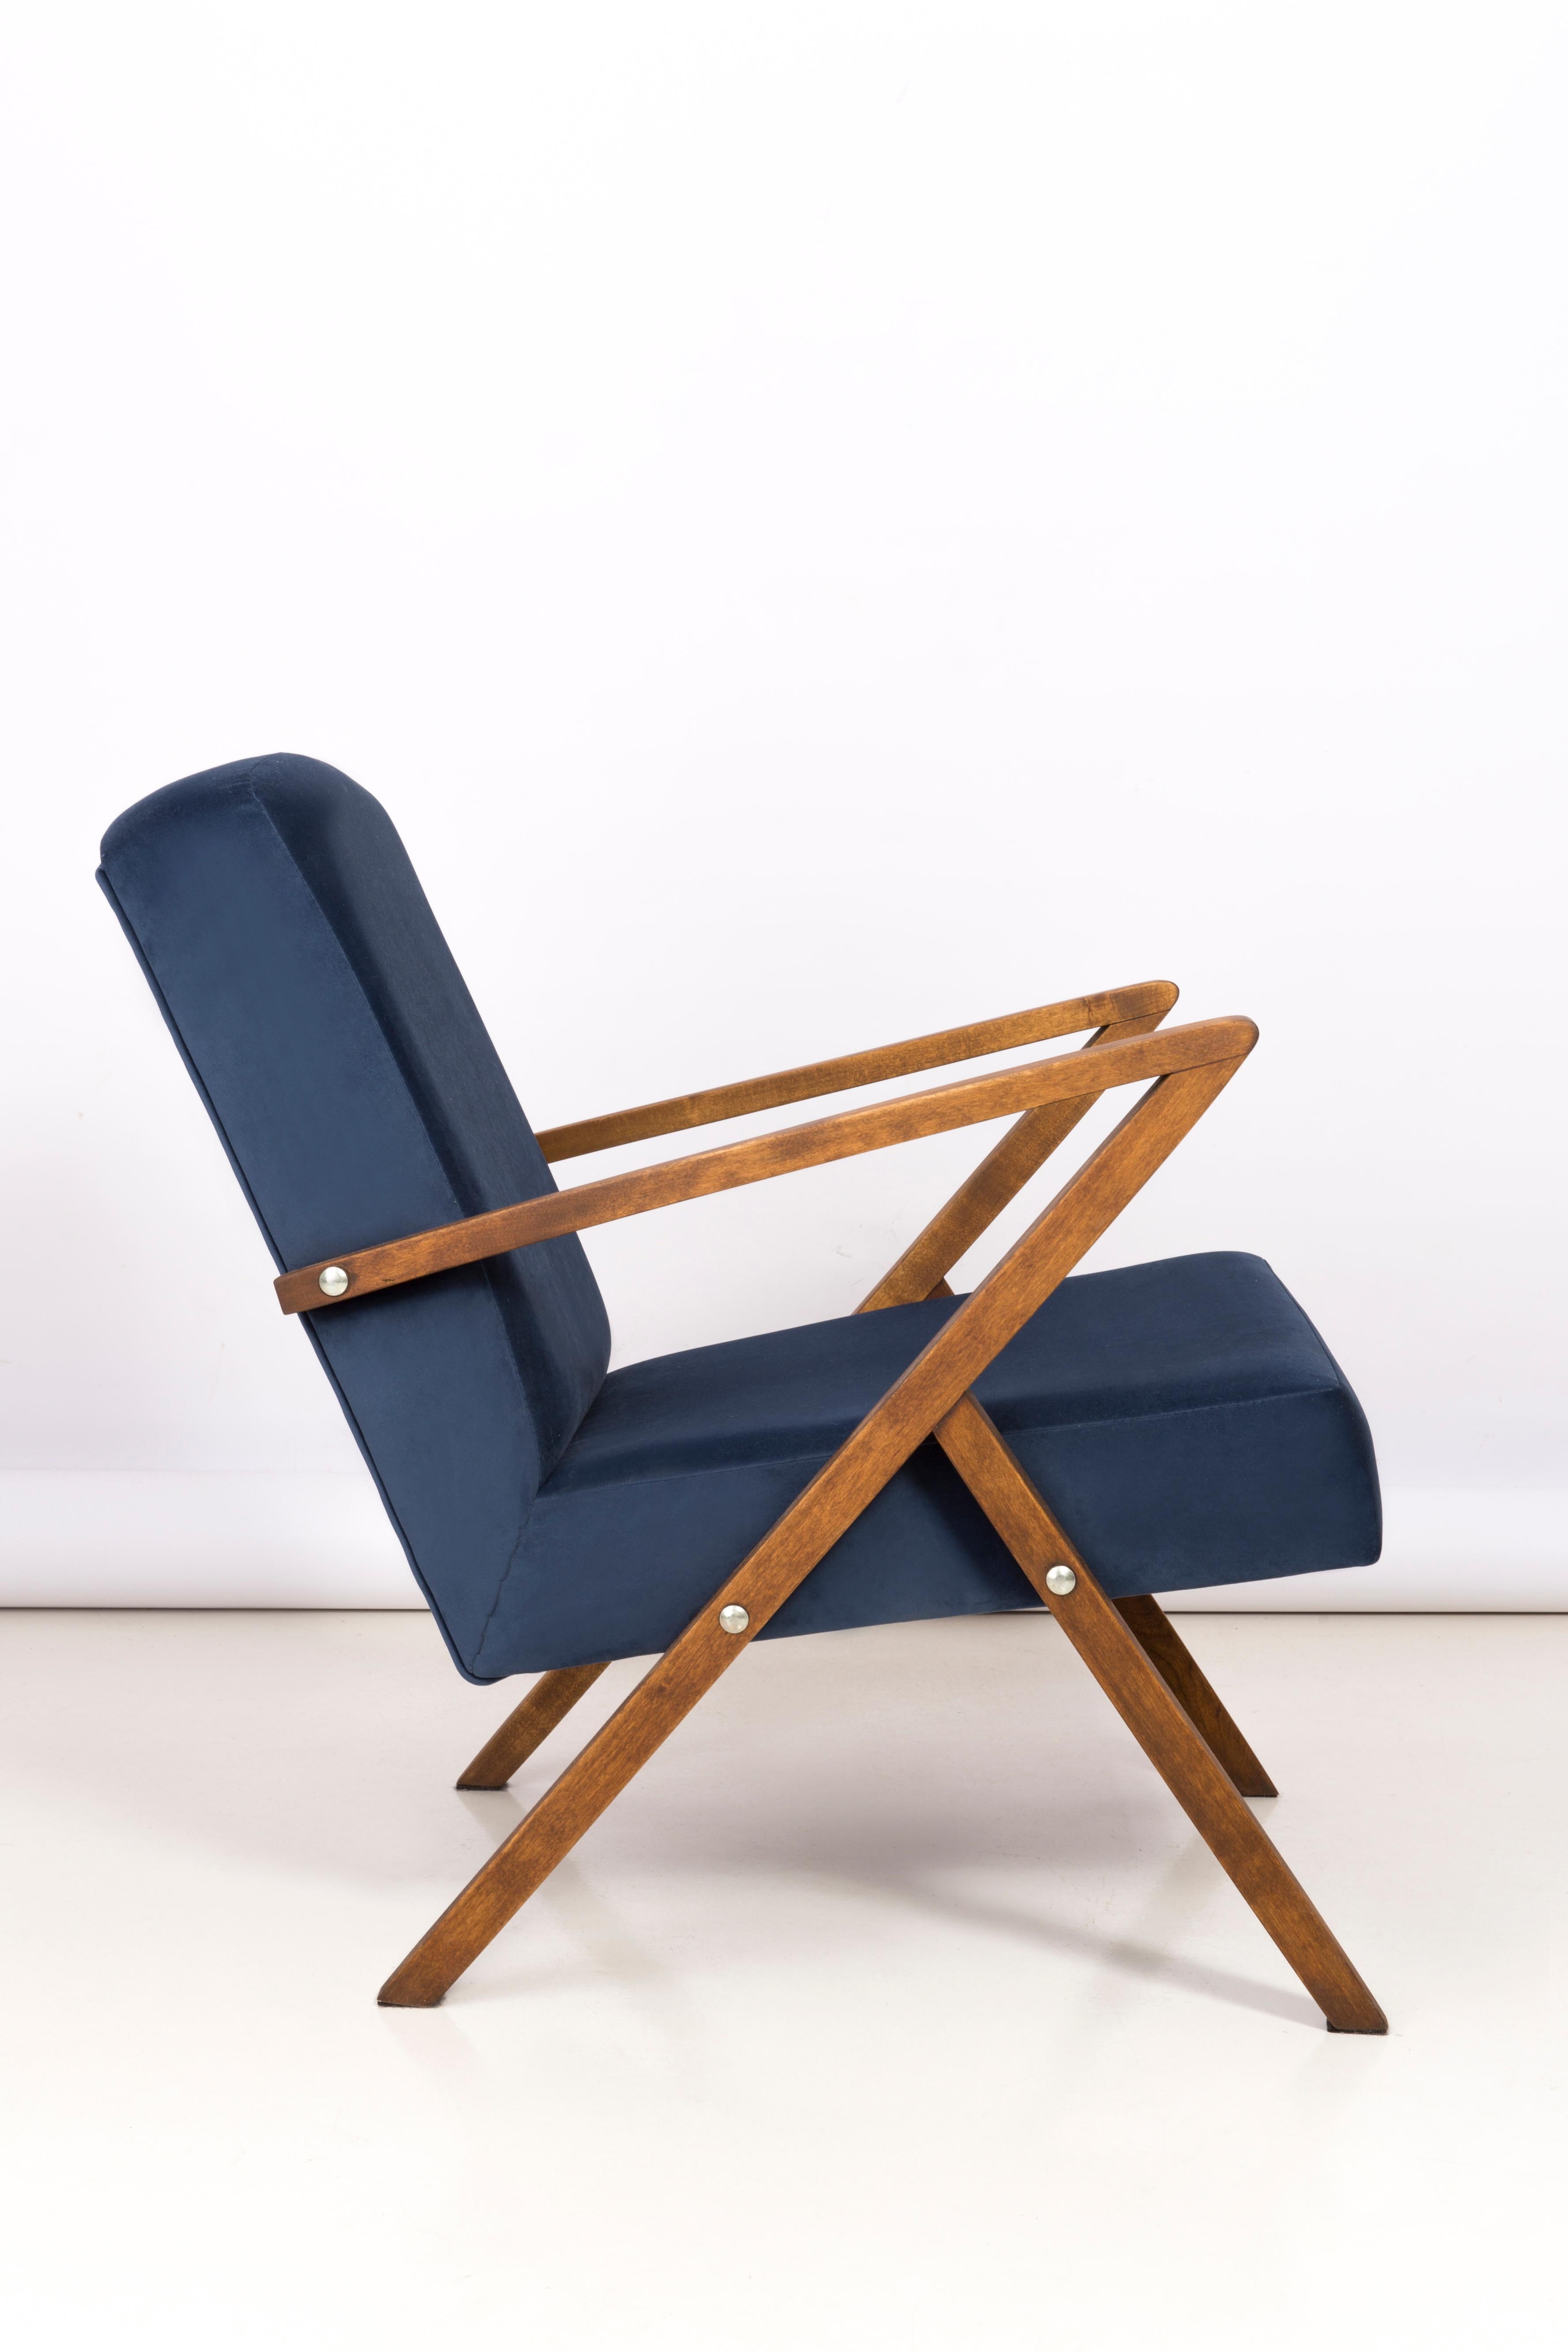 Hand-Crafted 20th Century Unique Zet Armchair, Navy Velvet, 1970s, Poland For Sale